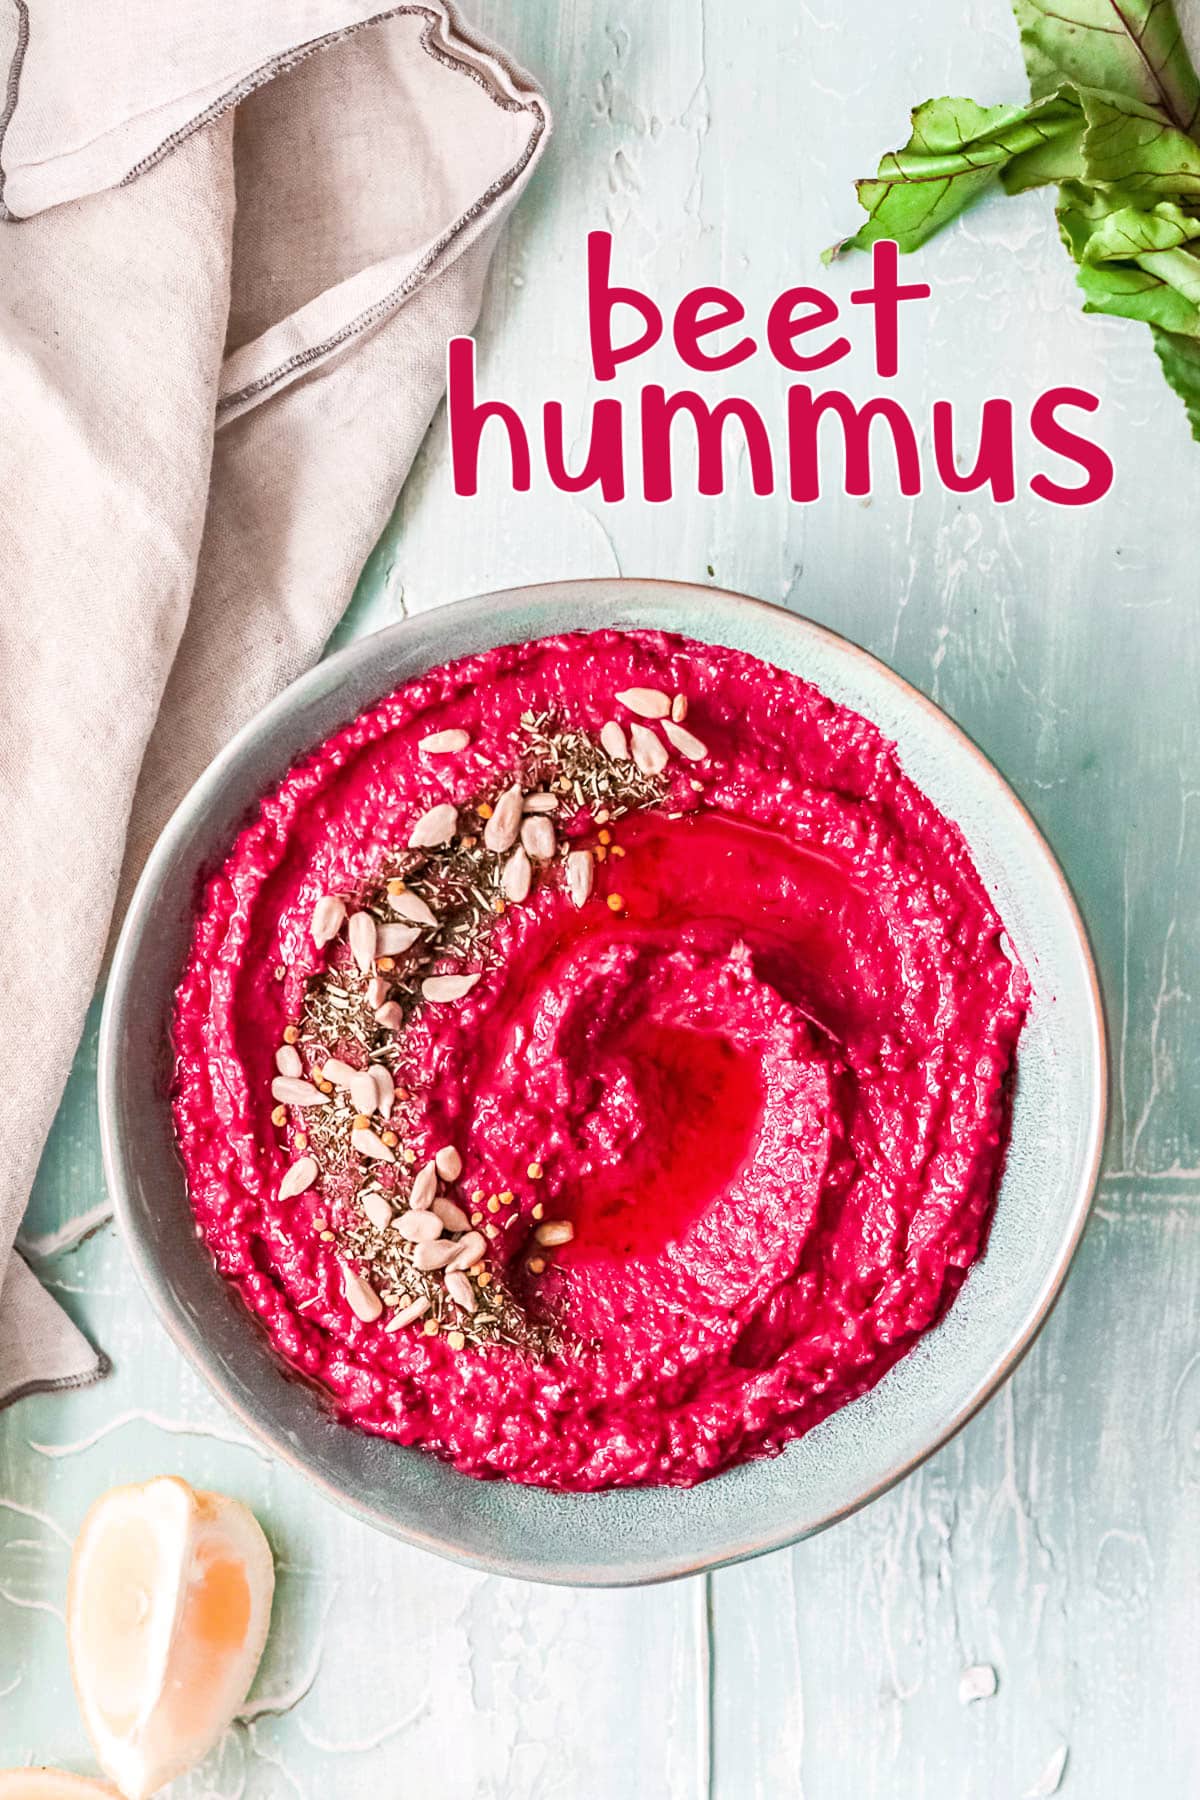 beet hummus in a light blue bowl with a beige napkin to the side and a title overlay at the top.